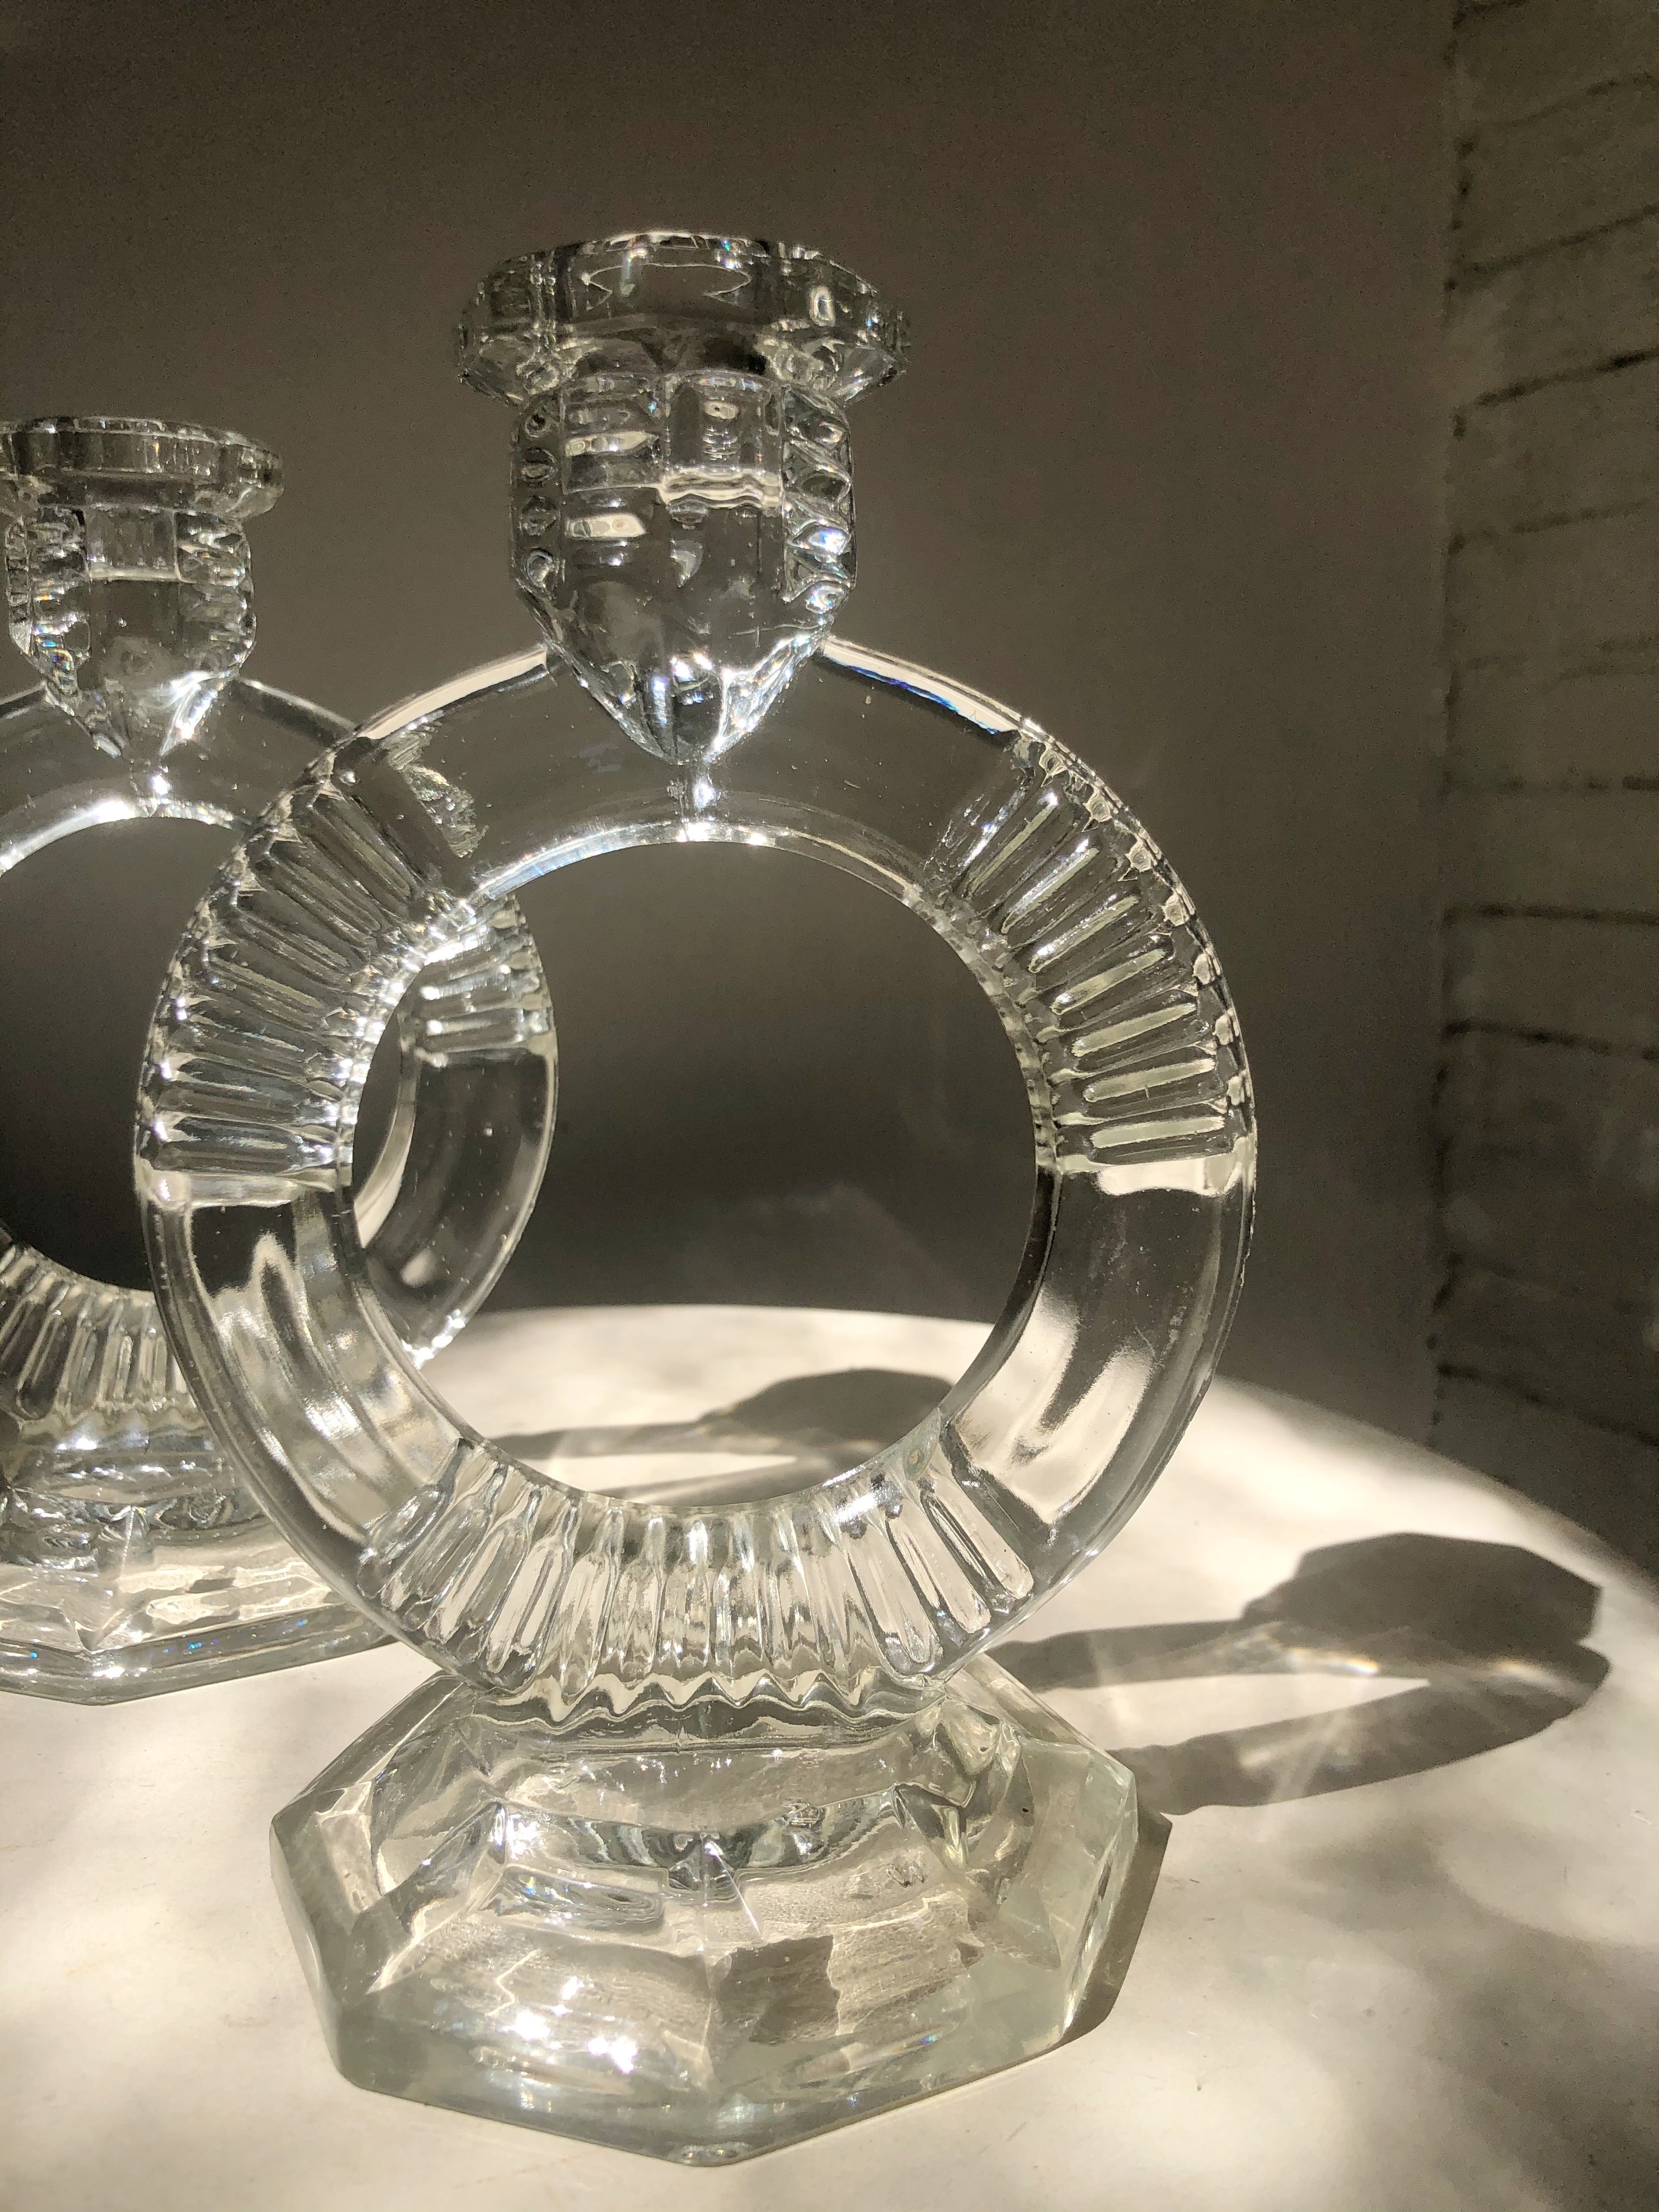 ART DECO STYLE CANDLE HOLDERS